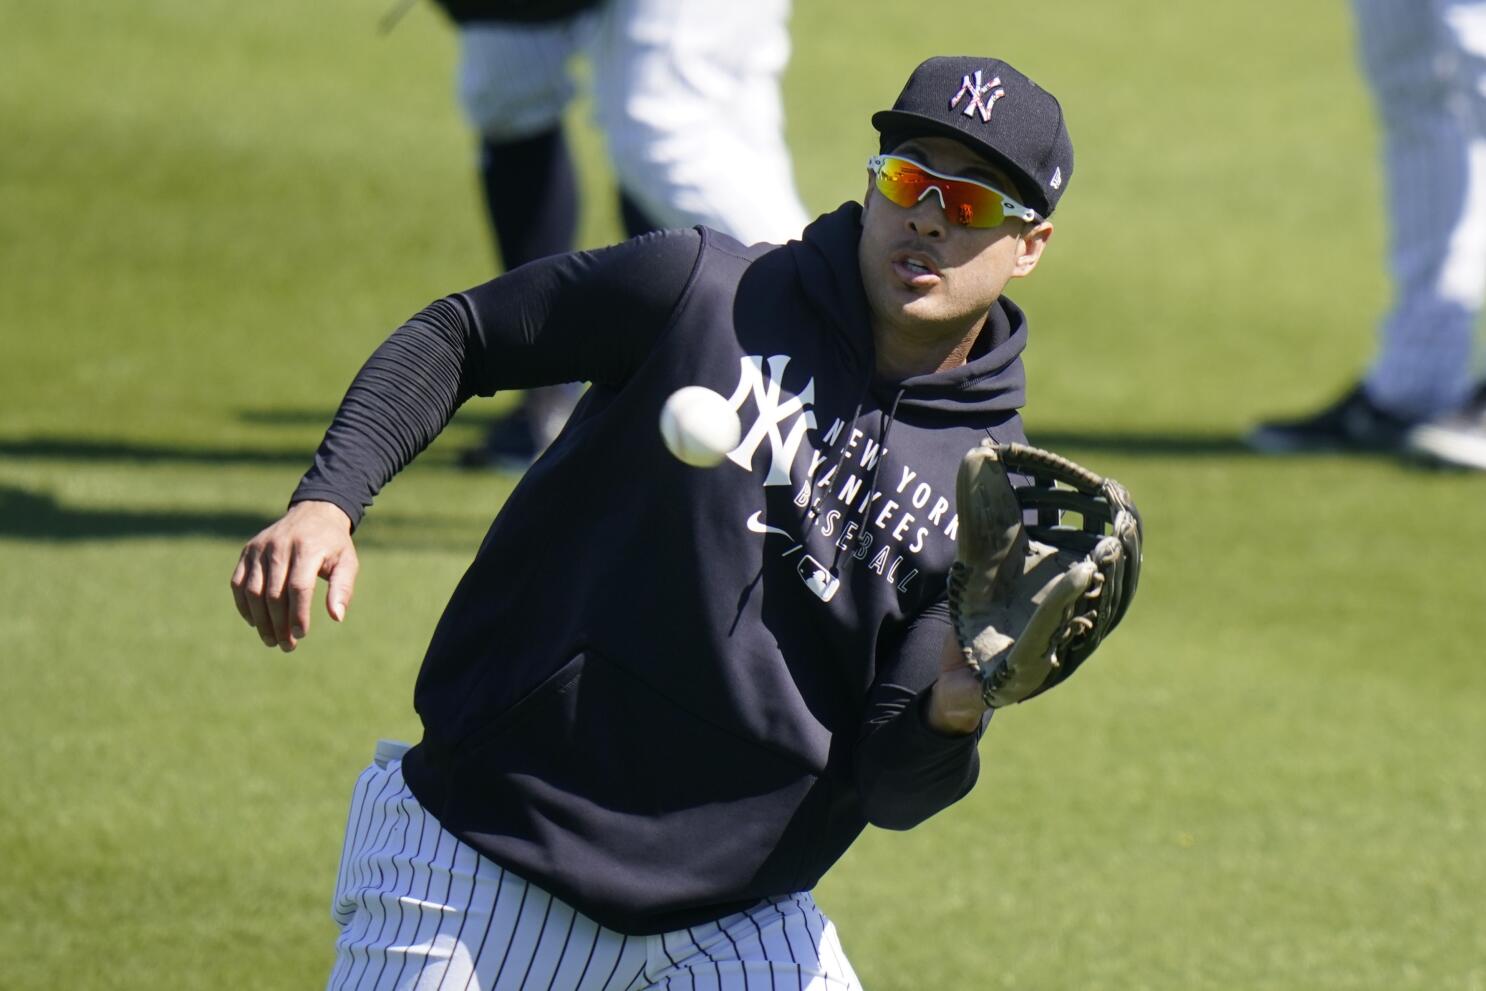 Yanks star Stanton off to strong start after smashing finish - The